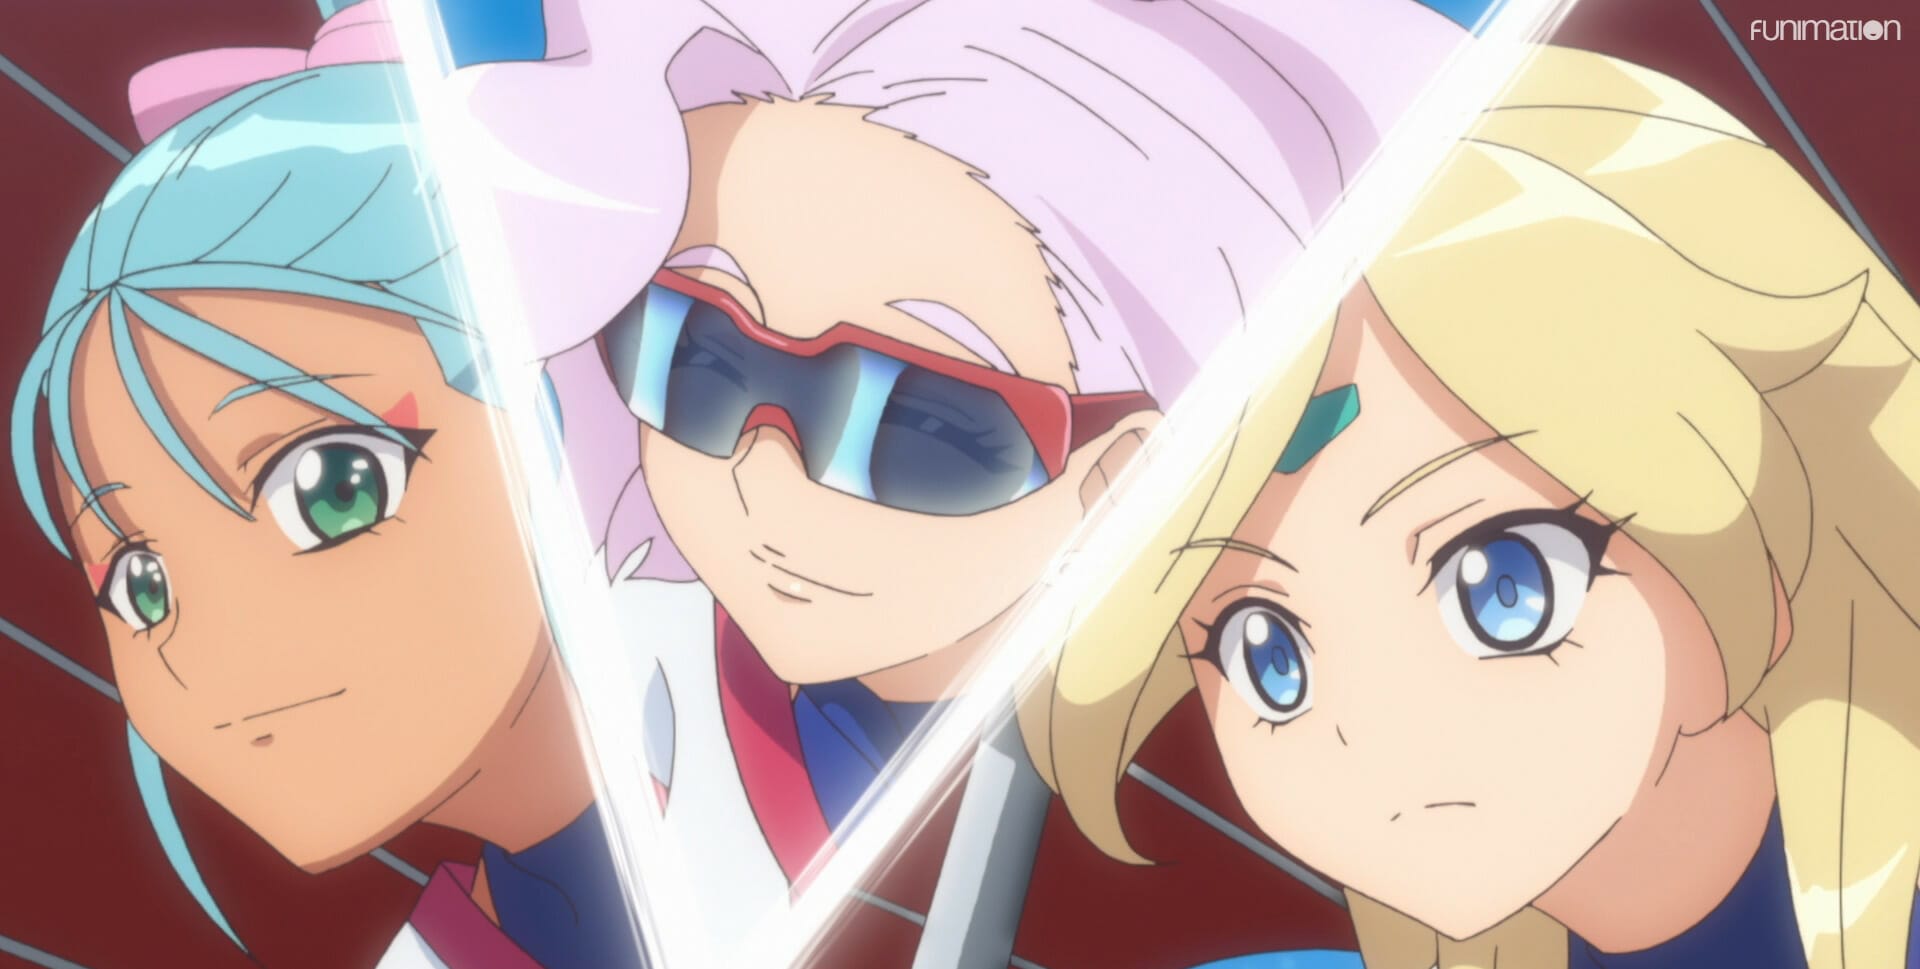 Still from Battle Athletes Victory ReSTART! that features close-ups of an aqua-haired woman, a blonde woman with a blue marking on her face, and a lavender-haired woman wearing sunglasses.